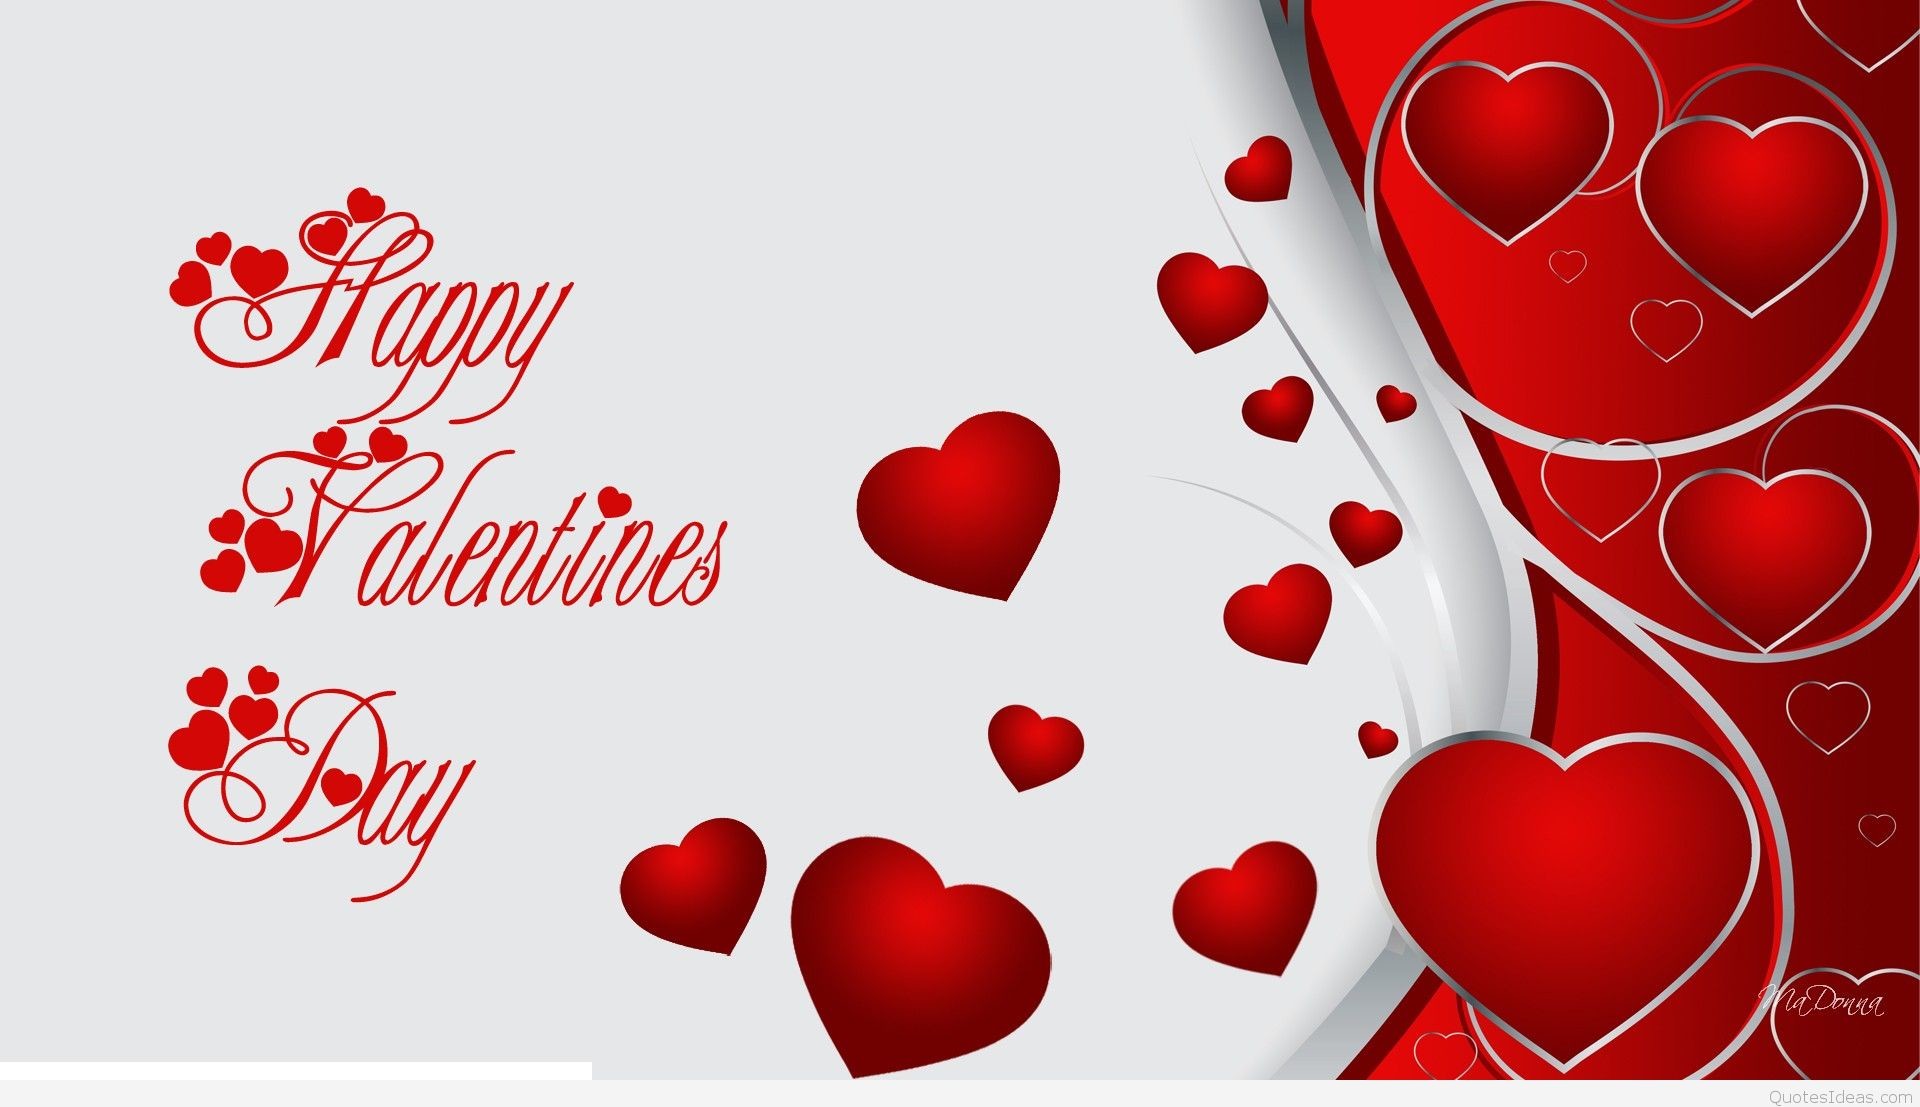 happy-valentine-day-HD-Wallpapers-for-pc2. f20c77c7dc5daf9fa5d4a0b939d04520